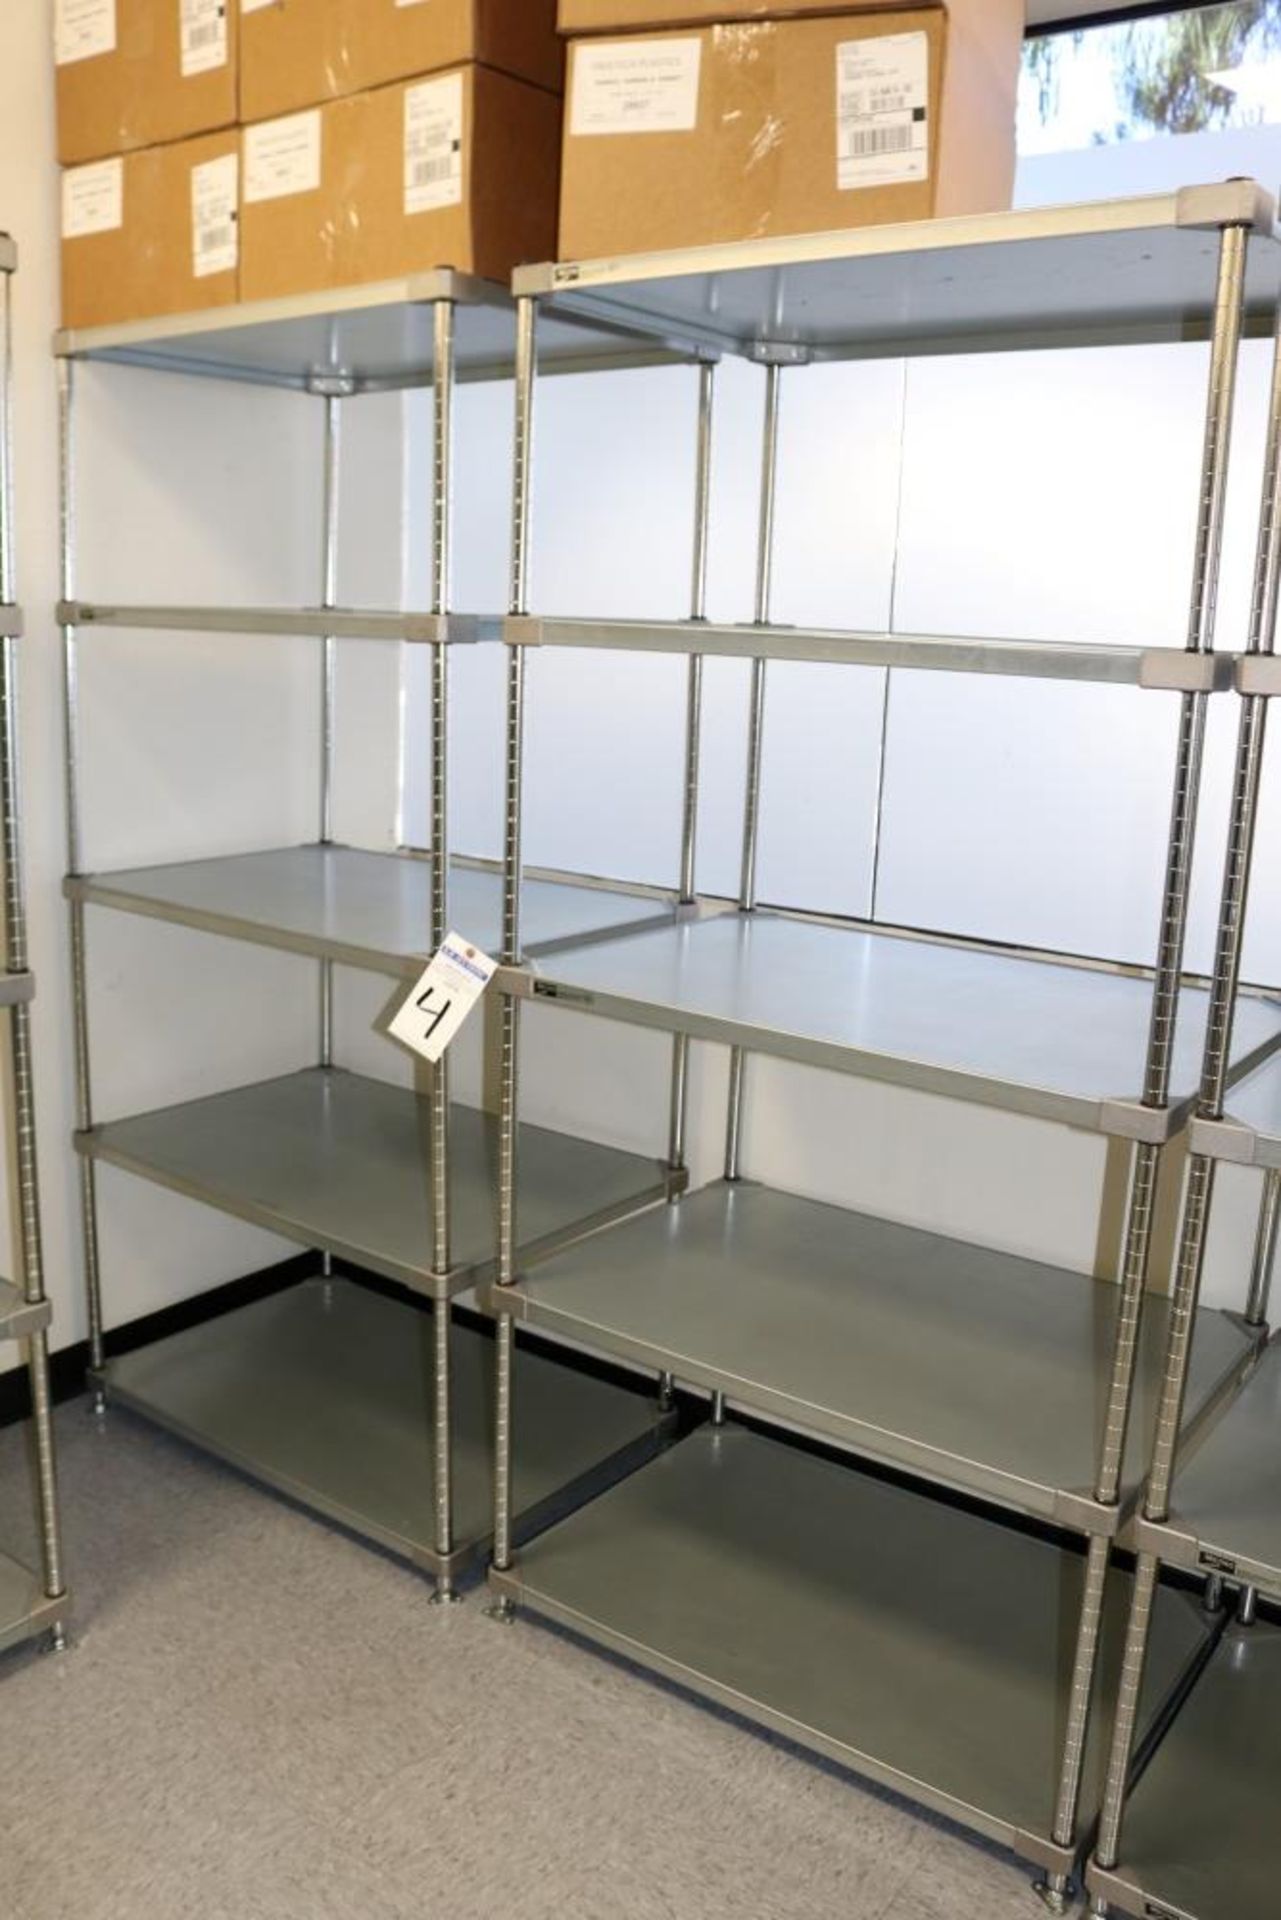 (2) 24" x 36" x 75" Metro 5 Tier, Heavy Duty Metal Racks (Made in the USA) - Image 5 of 5